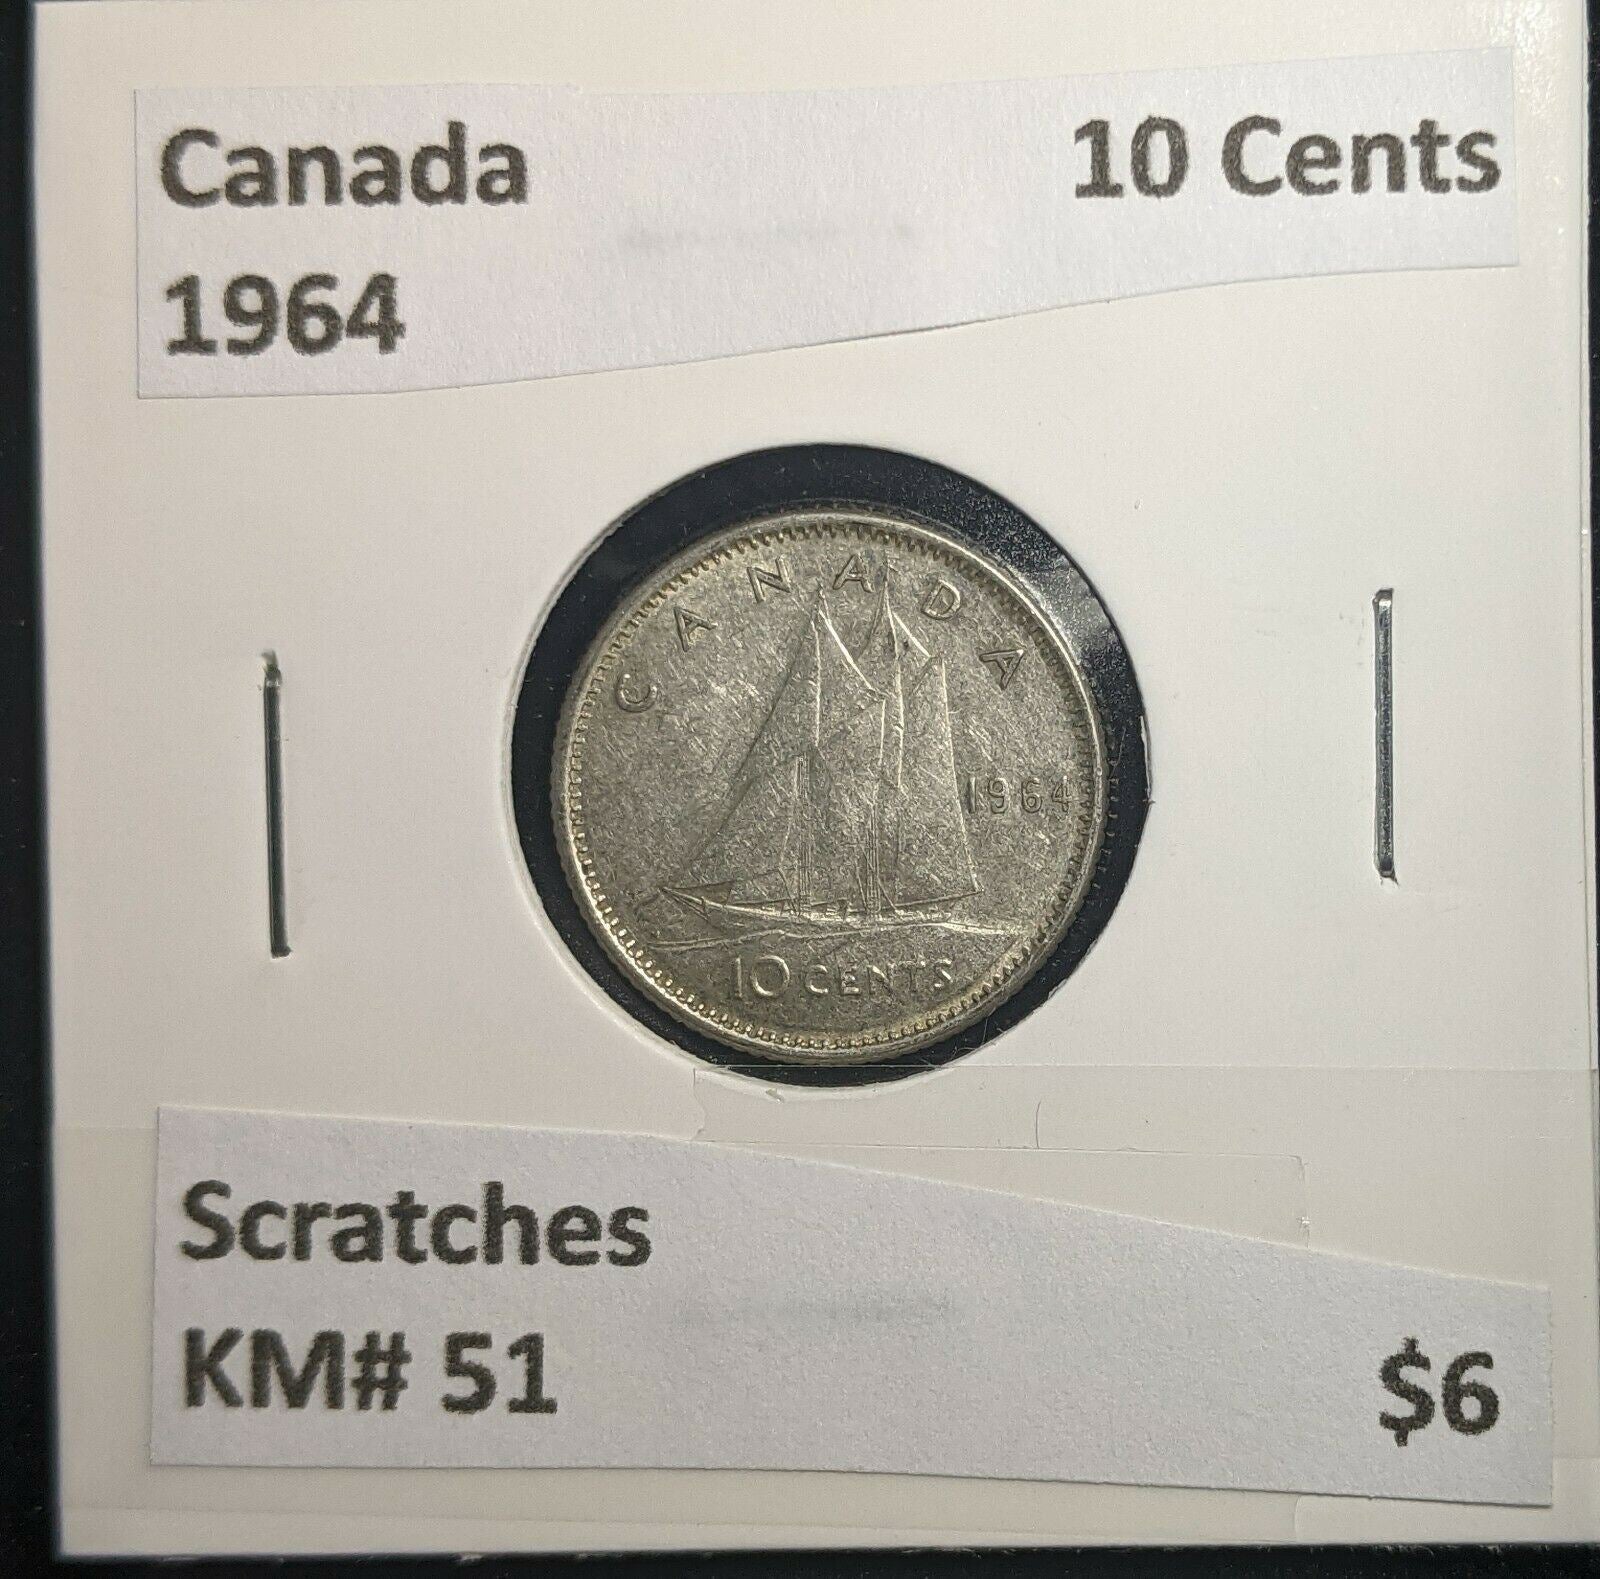 Canada 1964 10 Cents KM# 51 Scratches #095